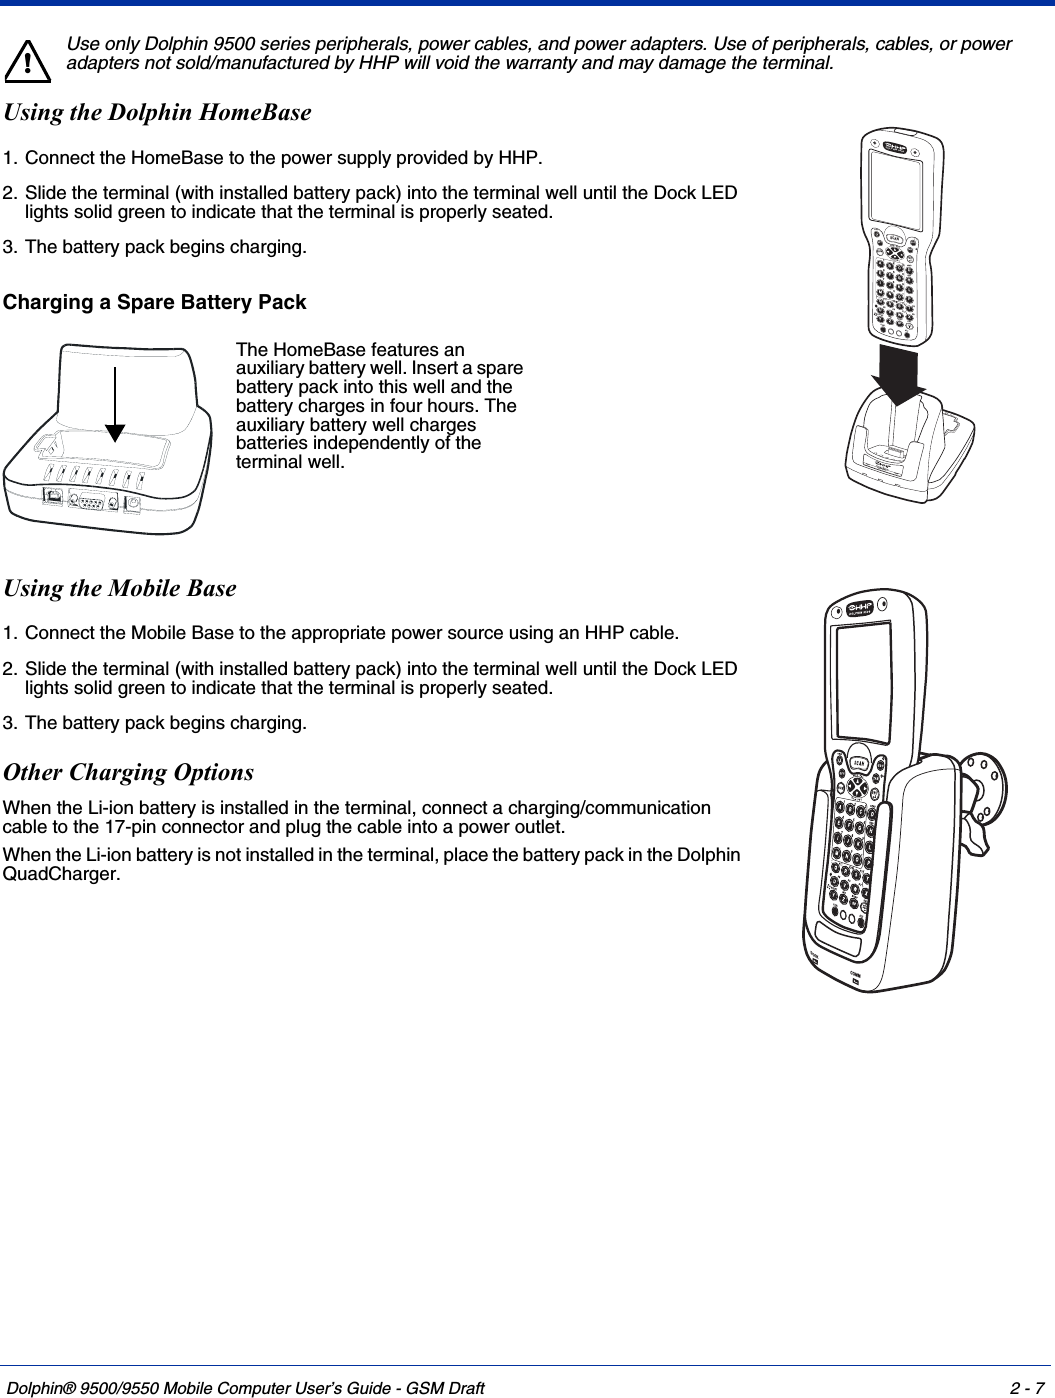 Dolphin® 9500/9550 Mobile Computer User’s Guide - GSM Draft 2 - 7Use only Dolphin 9500 series peripherals, power cables, and power adapters. Use of peripherals, cables, or power adapters not sold/manufactured by HHP will void the warranty and may damage the terminal. Using the Dolphin HomeBase1. Connect the HomeBase to the power supply provided by HHP.2. Slide the terminal (with installed battery pack) into the terminal well until the Dock LED lights solid green to indicate that the terminal is properly seated.3. The battery pack begins charging. Using the Mobile Base1. Connect the Mobile Base to the appropriate power source using an HHP cable.2. Slide the terminal (with installed battery pack) into the terminal well until the Dock LED lights solid green to indicate that the terminal is properly seated.3. The battery pack begins charging.Other Charging OptionsWhen the Li-ion battery is installed in the terminal, connect a charging/communication cable to the 17-pin connector and plug the cable into a power outlet.When the Li-ion battery is not installed in the terminal, place the battery pack in the Dolphin QuadCharger.!DOCKAUXBATTERYCOMMDOLPHIN9500SCANESCTABSFTABCEFGIJKMNOSRQUVWYZDHLPTXNUMENT123789456;:*@F1F2F3F4F5F6F7F8STARTINSBKSPDELCTRLALTSENDENDPOWERVOLPGVOLPG++-0,SPCharging a Spare Battery PackThe HomeBase features an auxiliary battery well. Insert a spare battery pack into this well and the battery charges in four hours. The auxiliary battery well charges batteries independently of the terminal well.DOCKCOMM